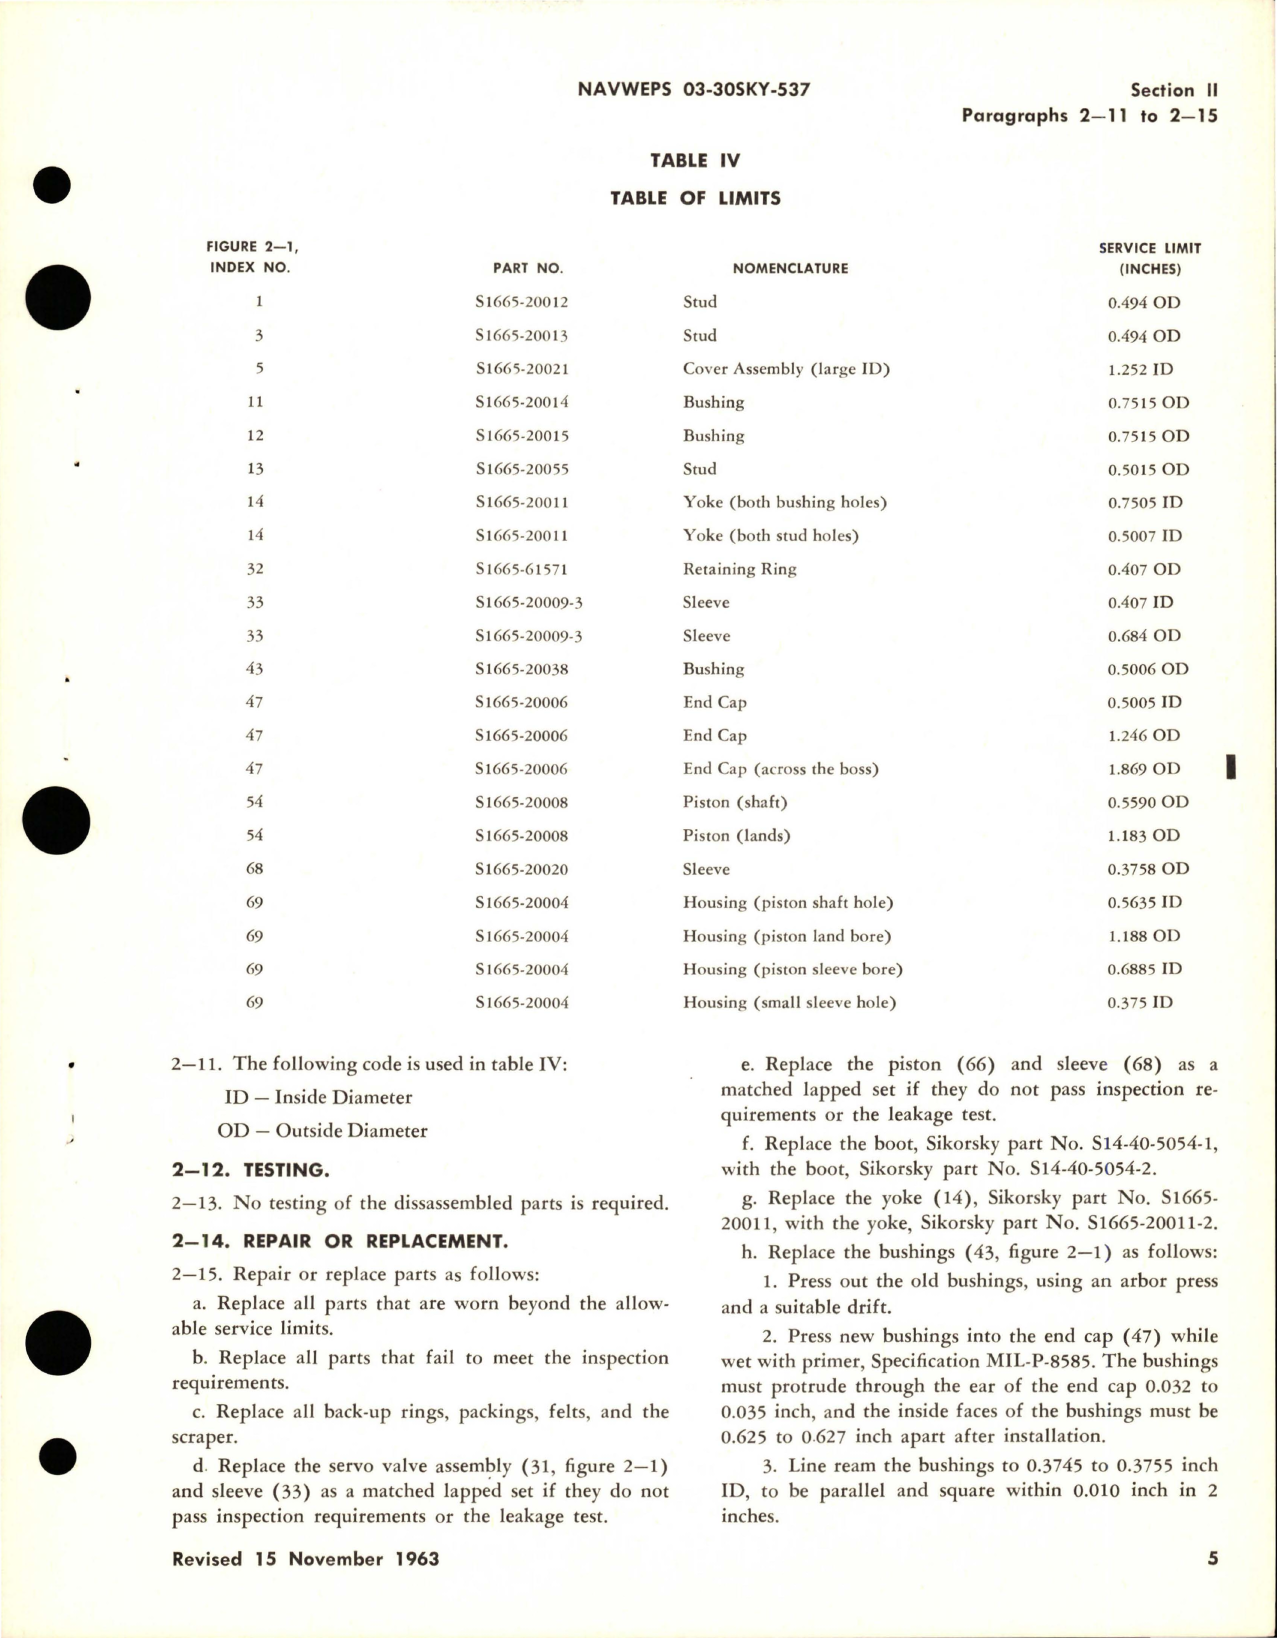 Sample page 5 from AirCorps Library document: Overhaul Instructions for Motor Rotor Servo Unit Assembly - Parts S1665-20003 and S1665-20003-1